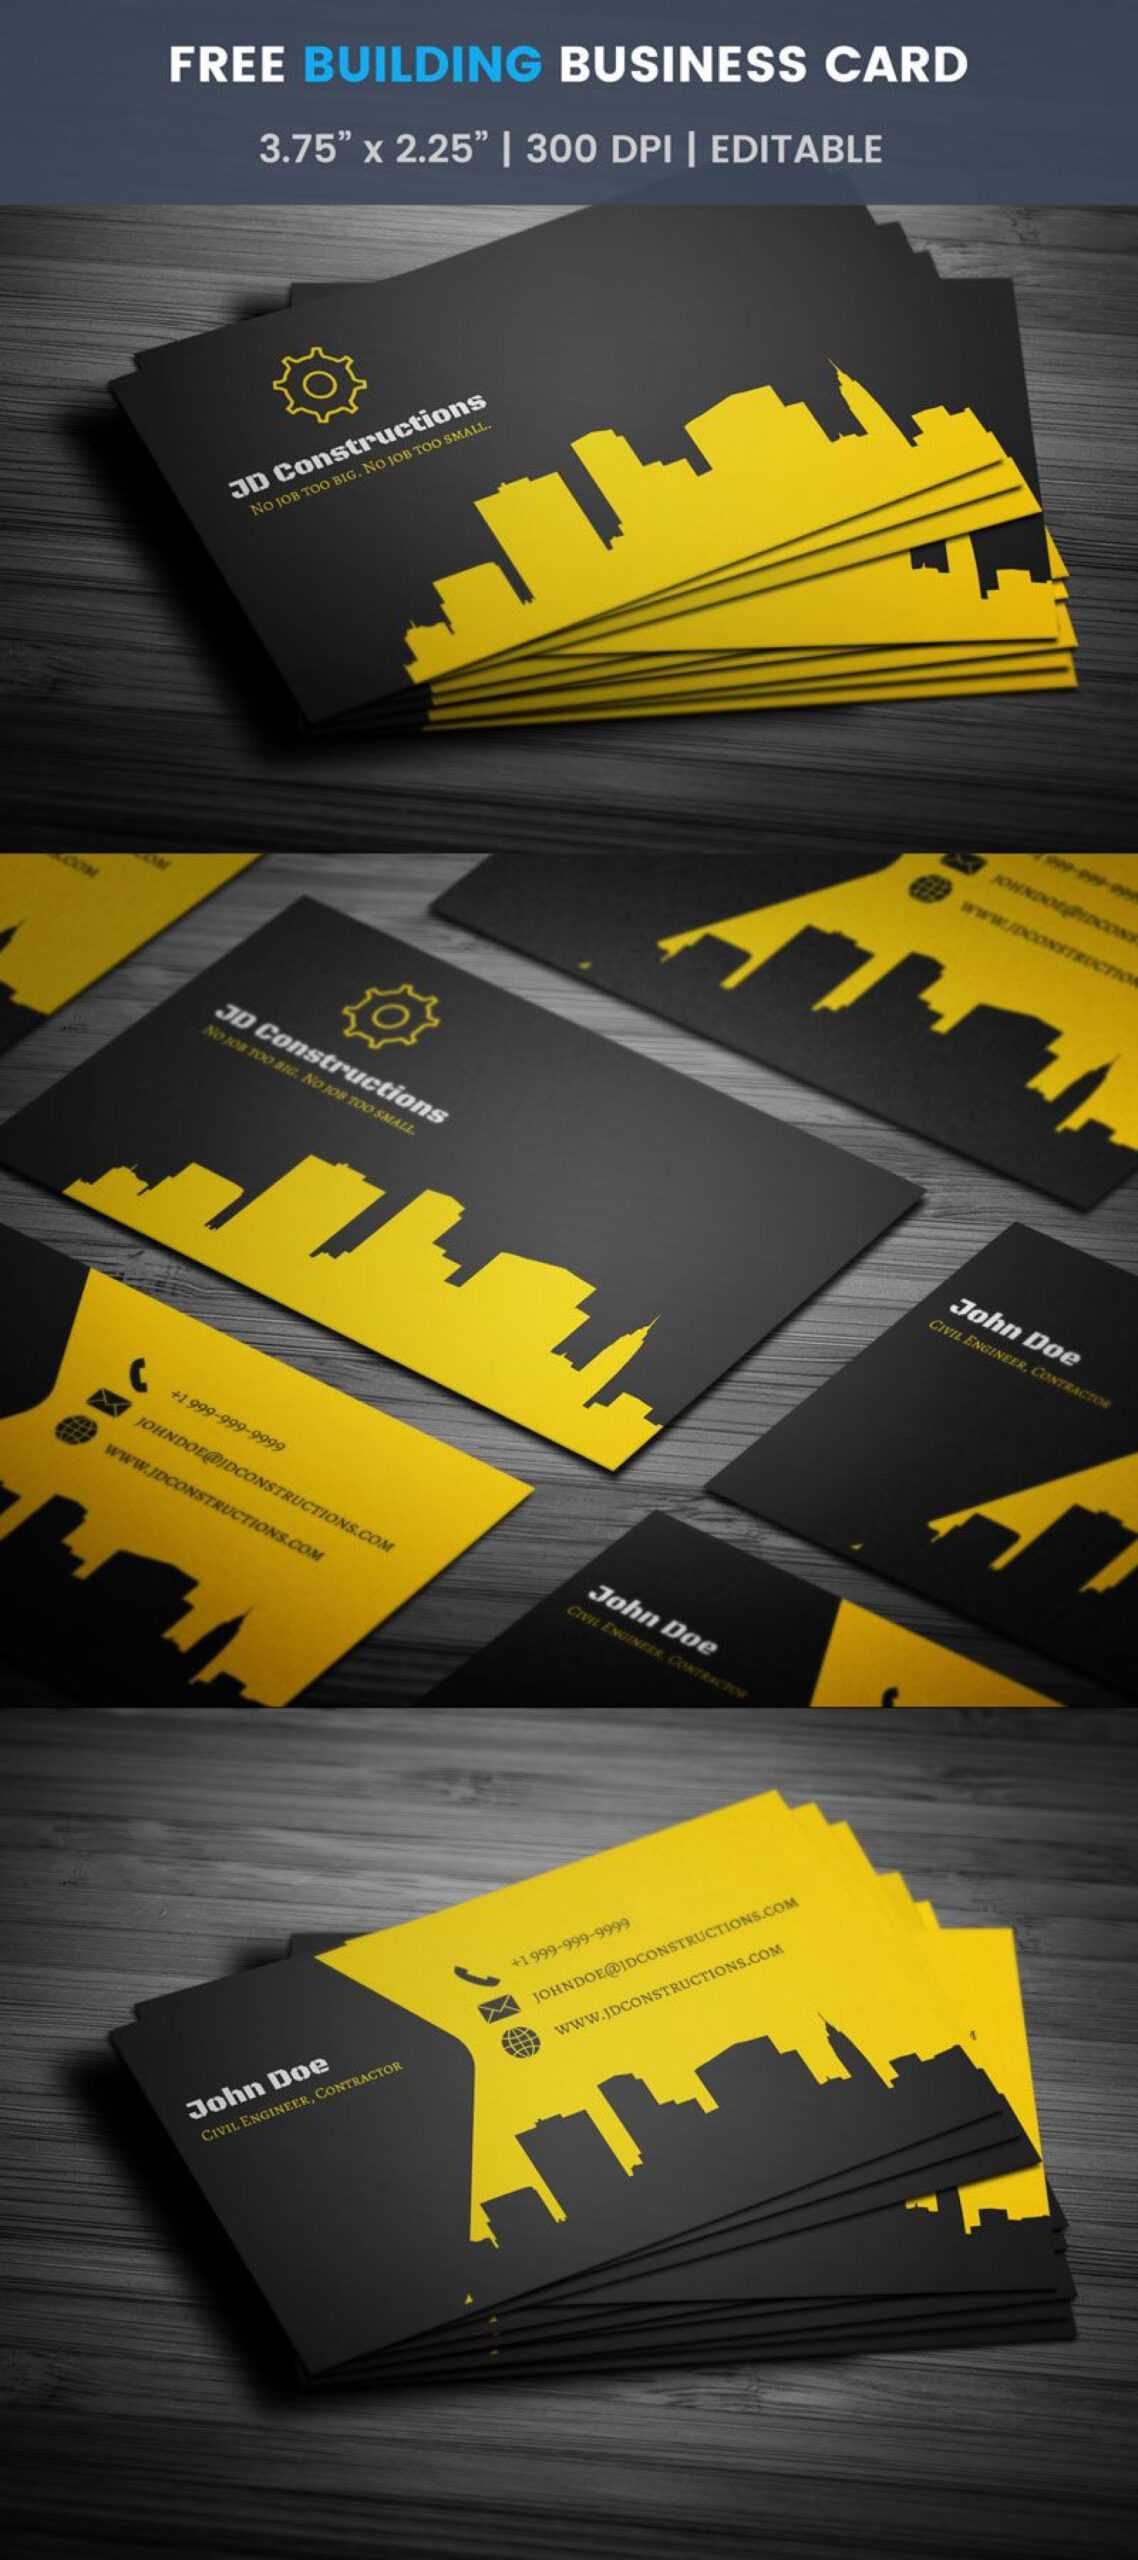 021 Trancprnt Business Card Template Ideas Construction Regarding Construction Business Card Templates Download Free